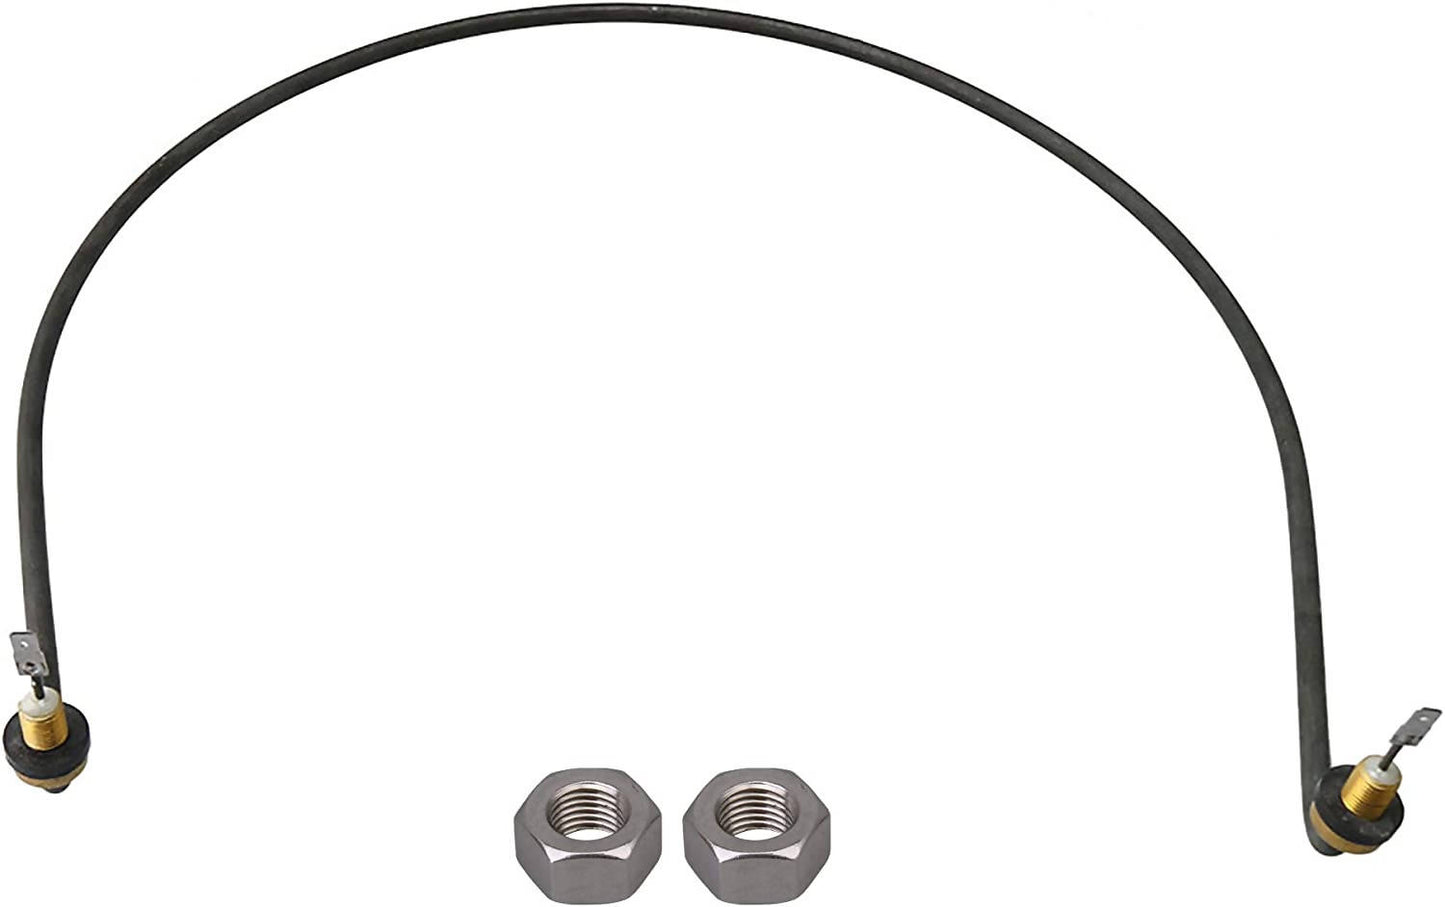 Whirlpool Dishwasher Heating Element - W10518394, Replaces: 2977737 8194250 8563007 8572861 AH8260087 W10134009 W10441445 OEM PARTS WORLD